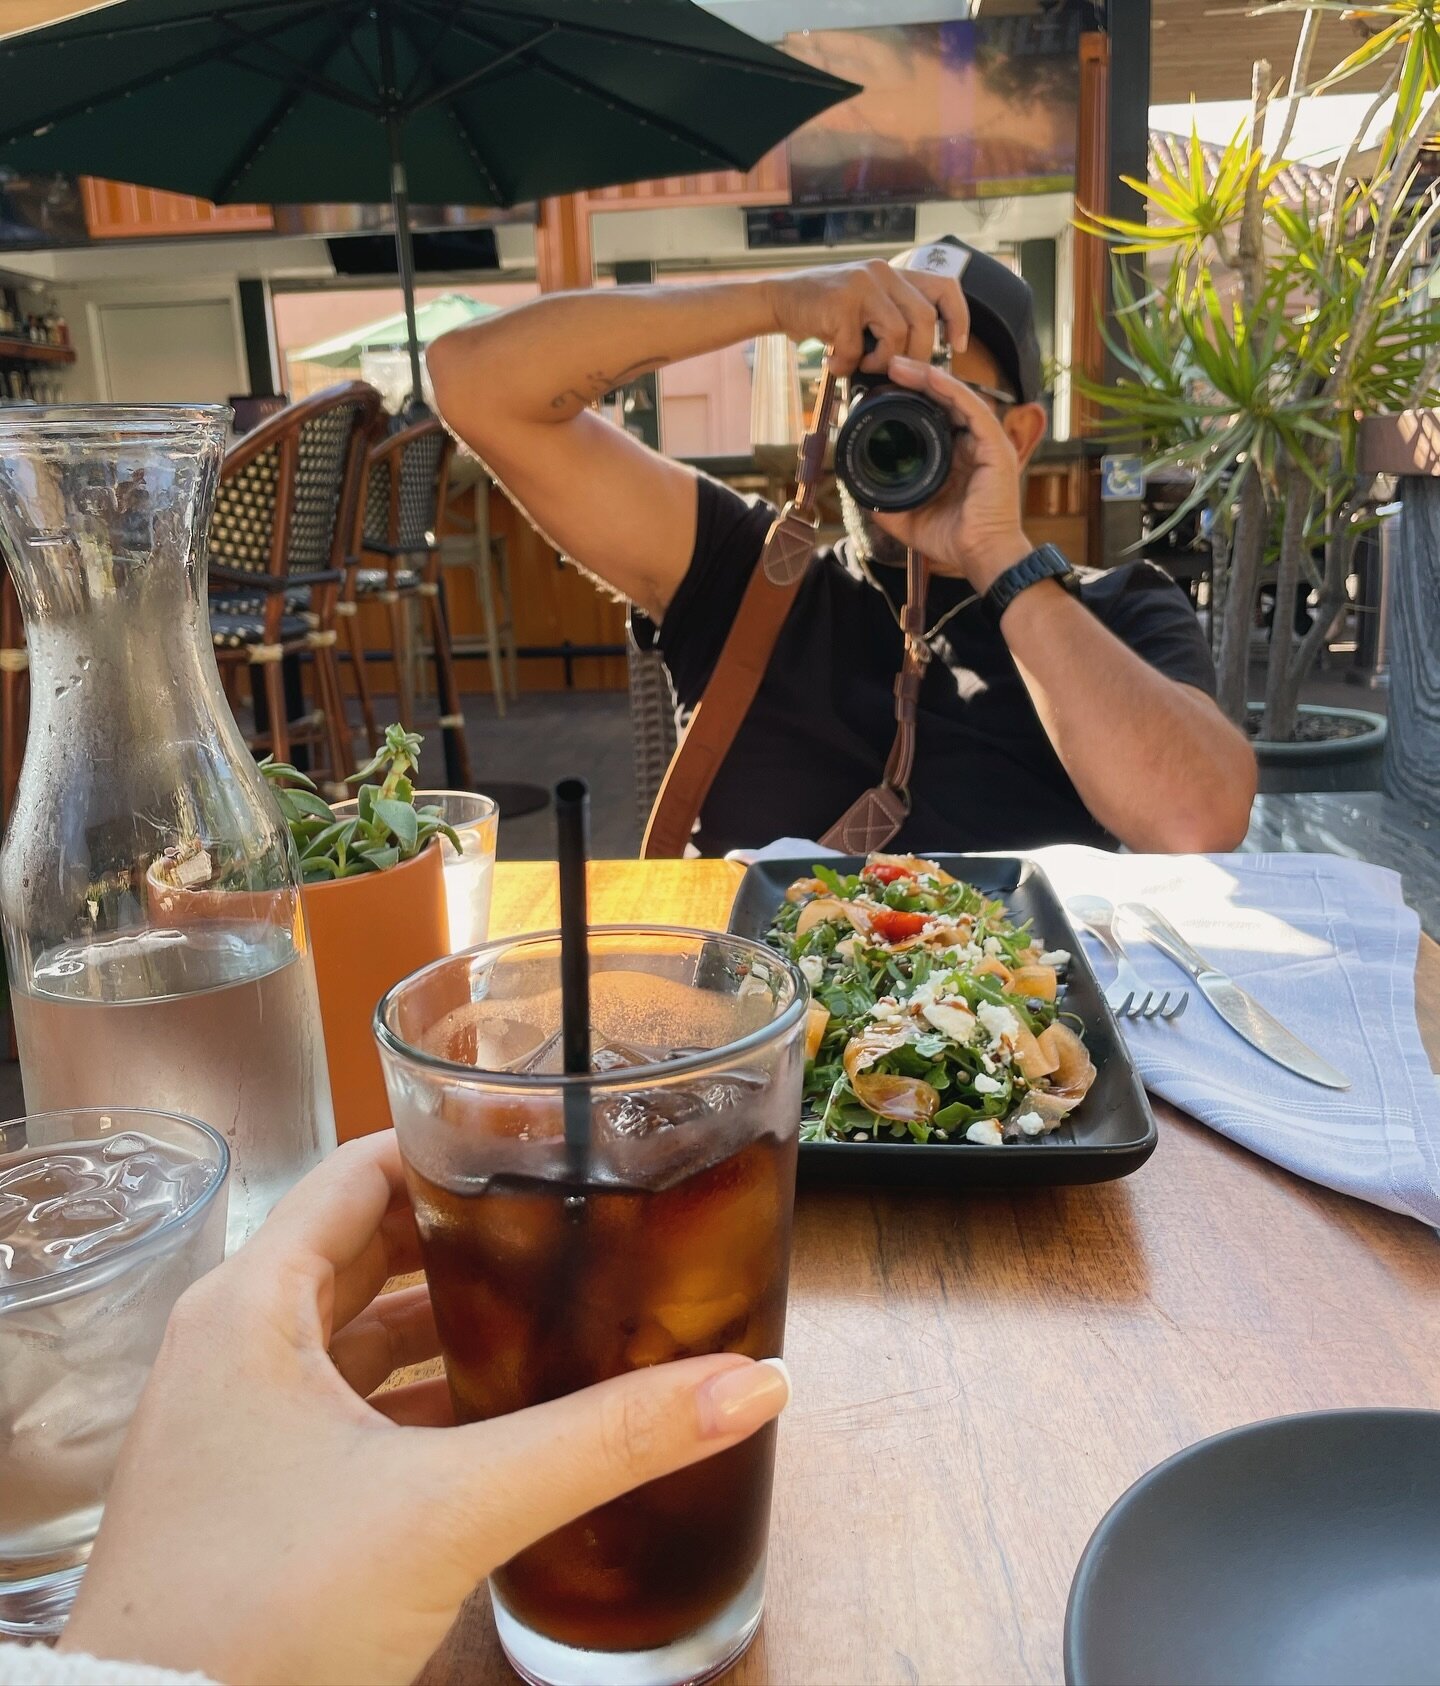 Camera eats first 📸 Come see us for Lunch and try one of our tasty new menu items!